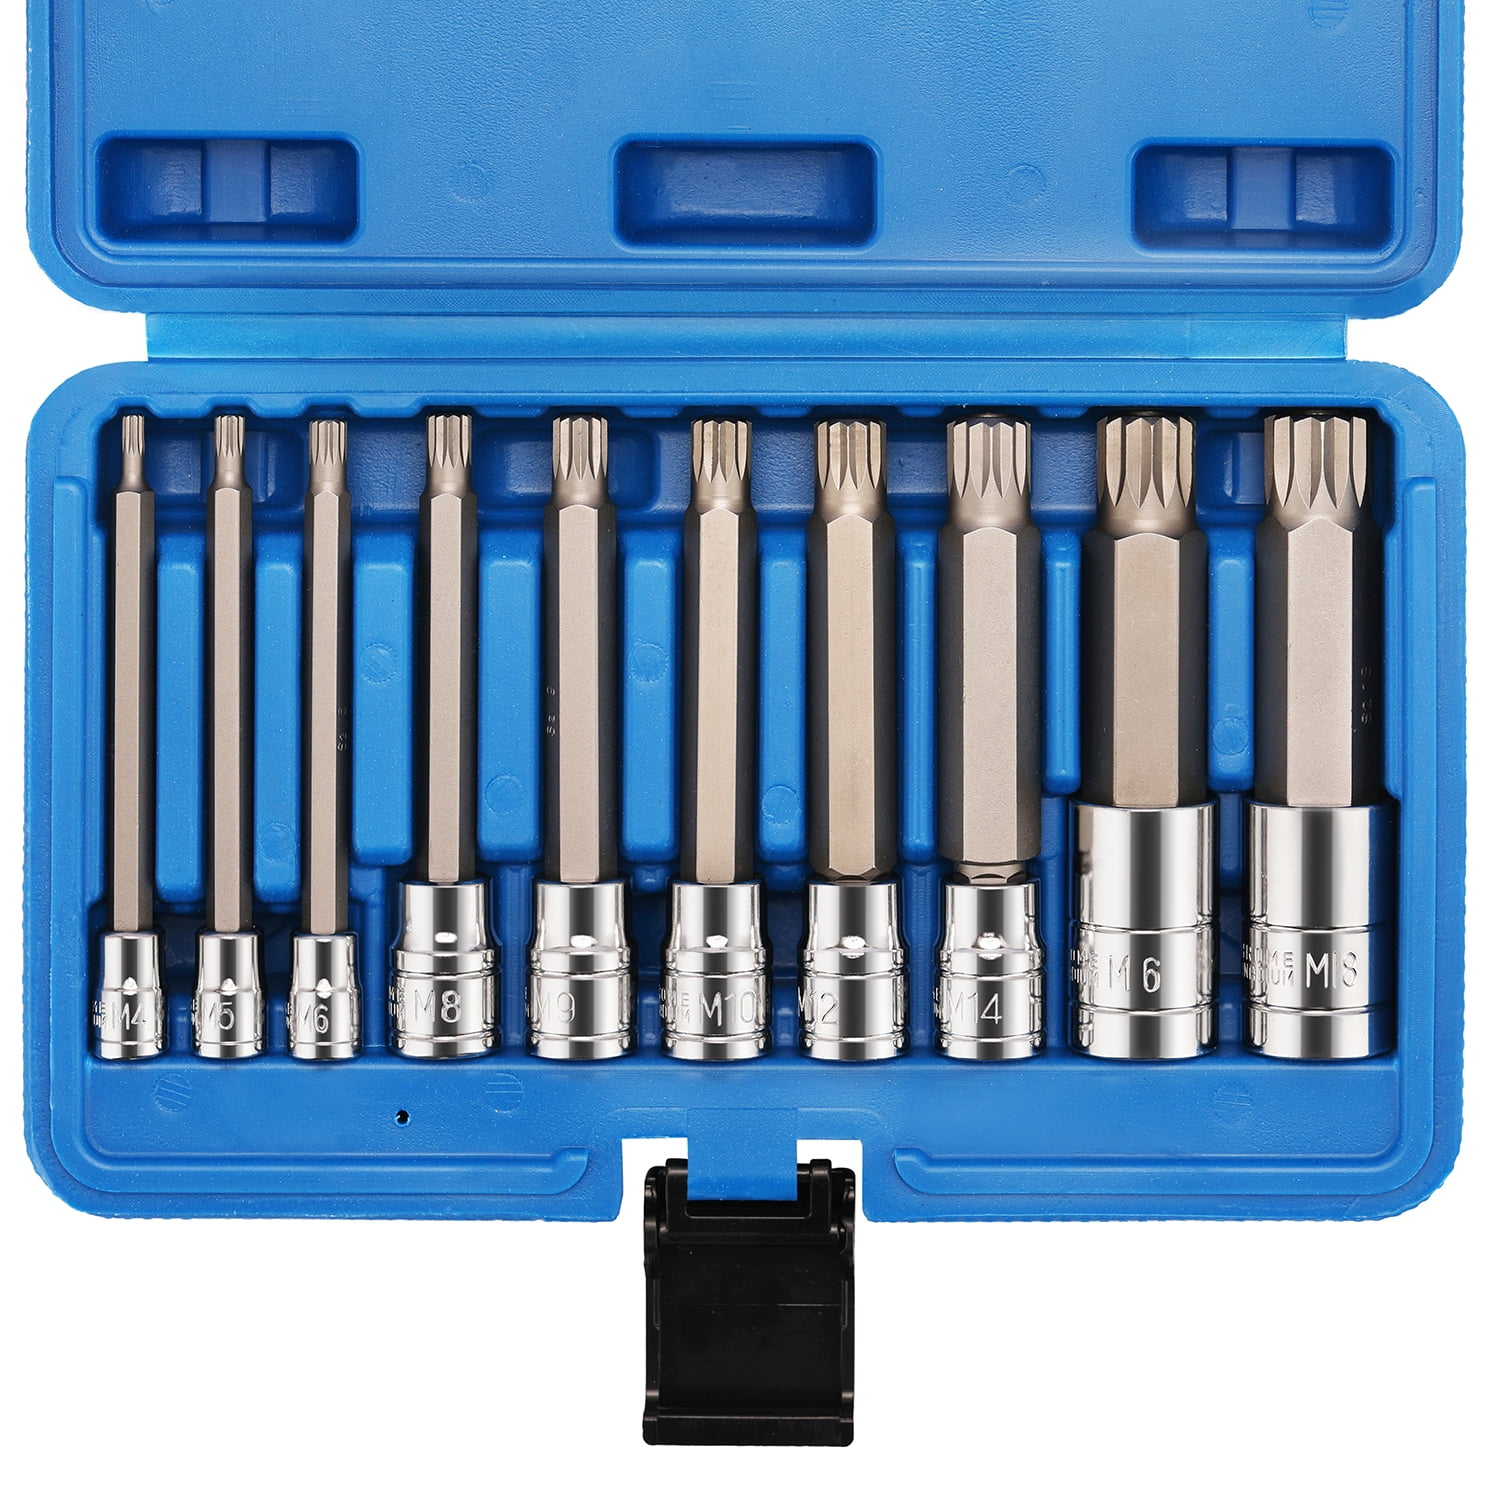 Olympia Tools 76-521-N12 28-Piece Socket and Driver Bits Set 